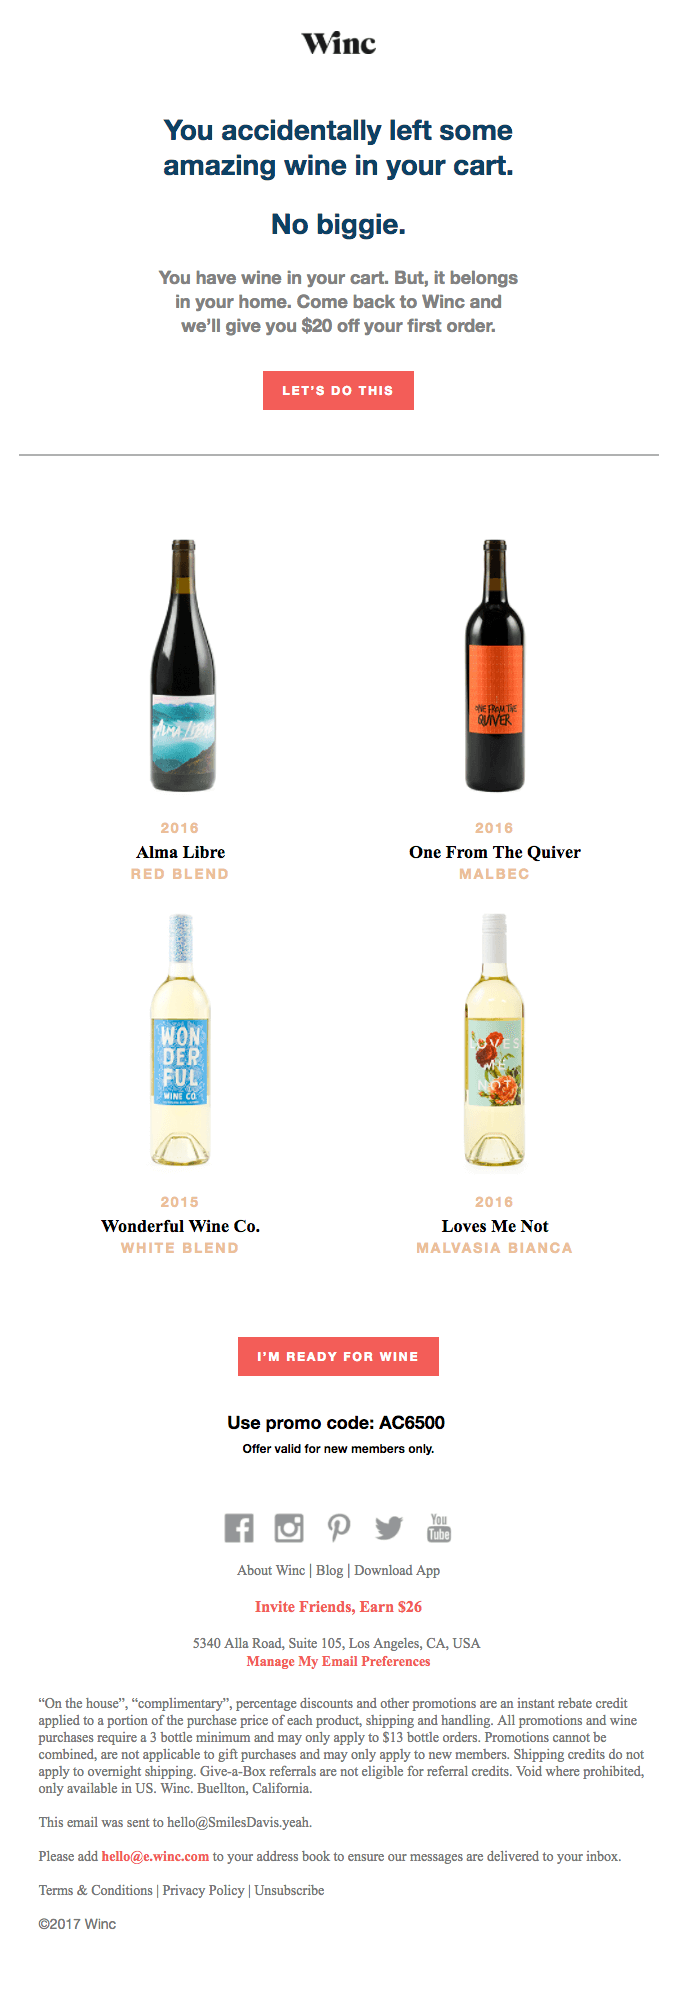 Winc with their "You forgot something unforgettable" email